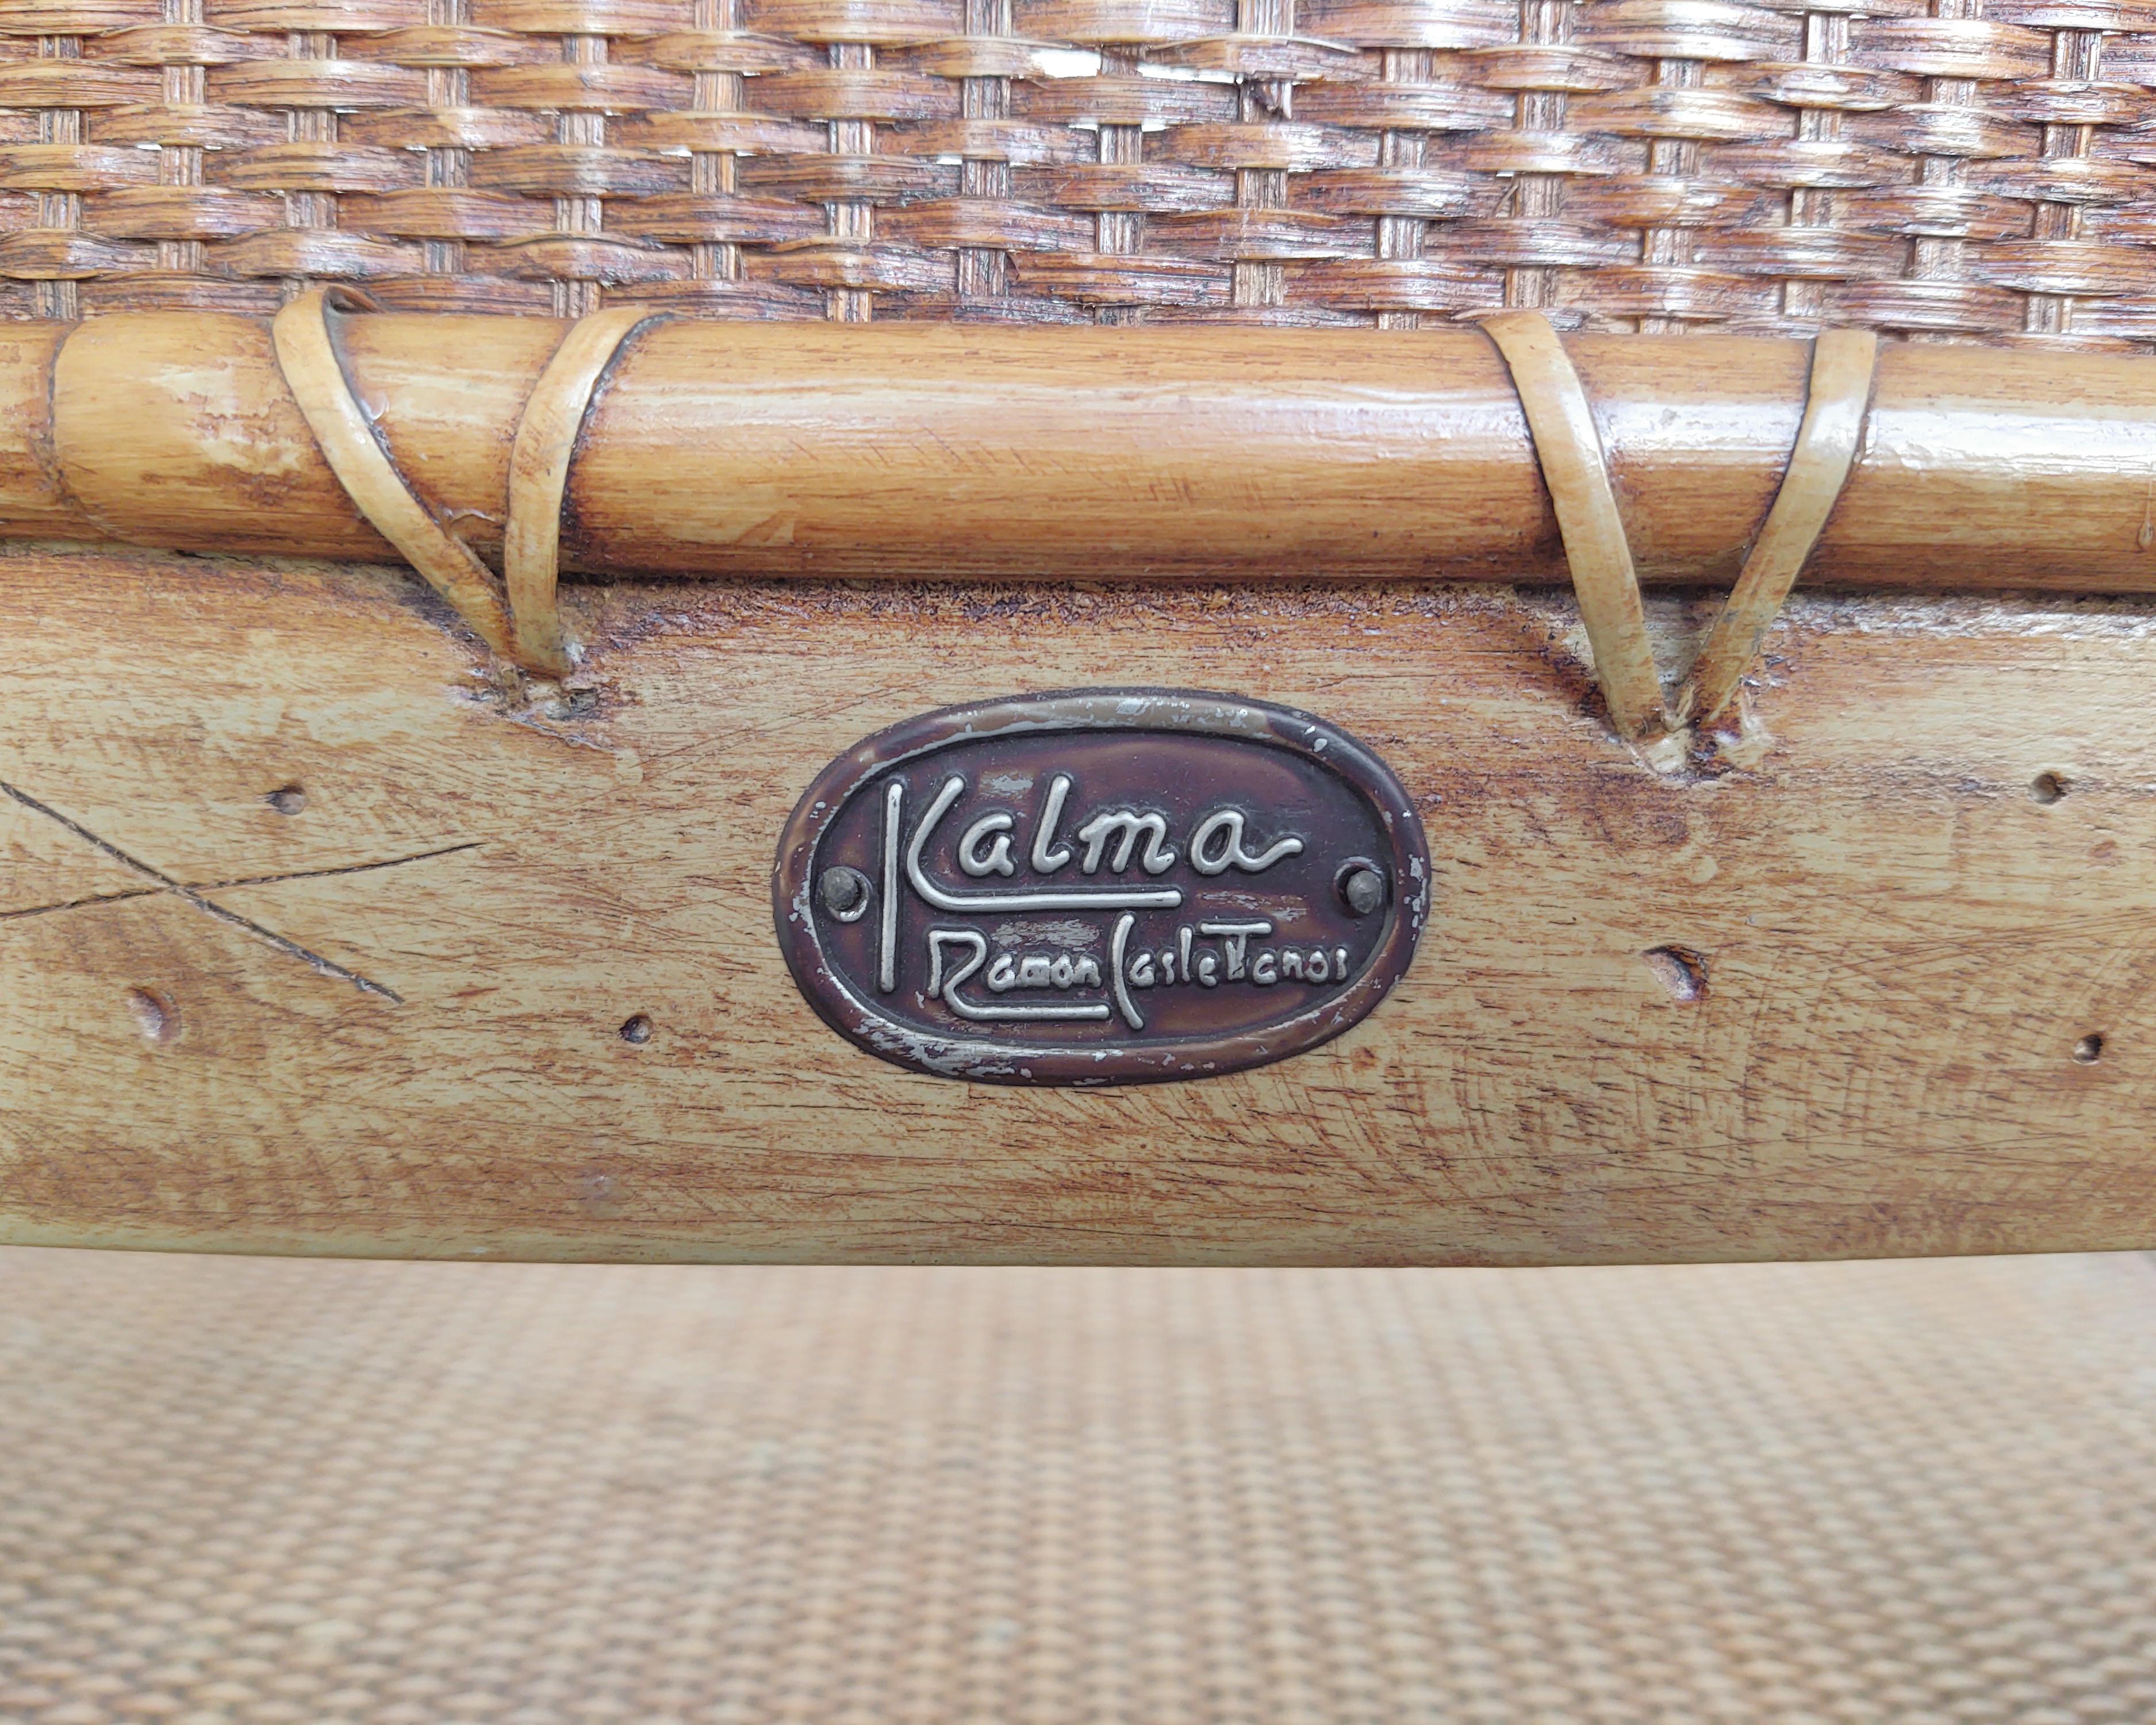 Late 20th Century Sculptural Rattan Arm Chair Designed by Ramon Castellano for Kalma Furniture For Sale